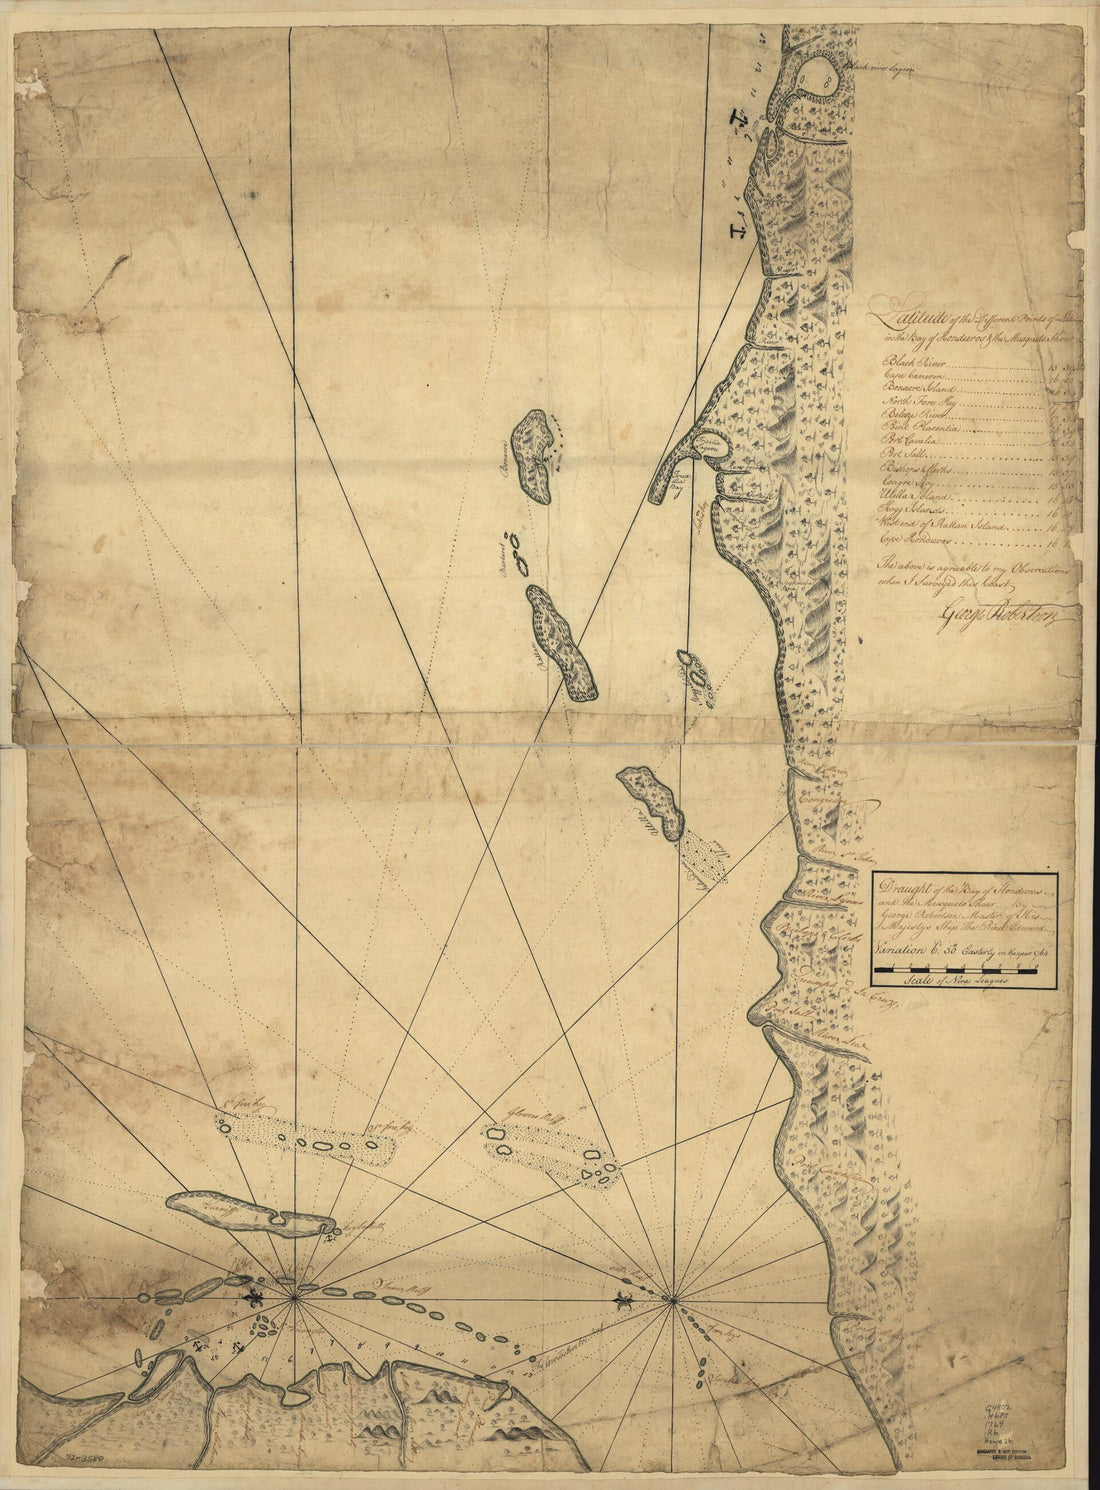 This old map of Draught of the Bay of Honduras and the Musqueto Shoar from 1764 was created by  Prince Edward (Ship), George Robertson in 1764